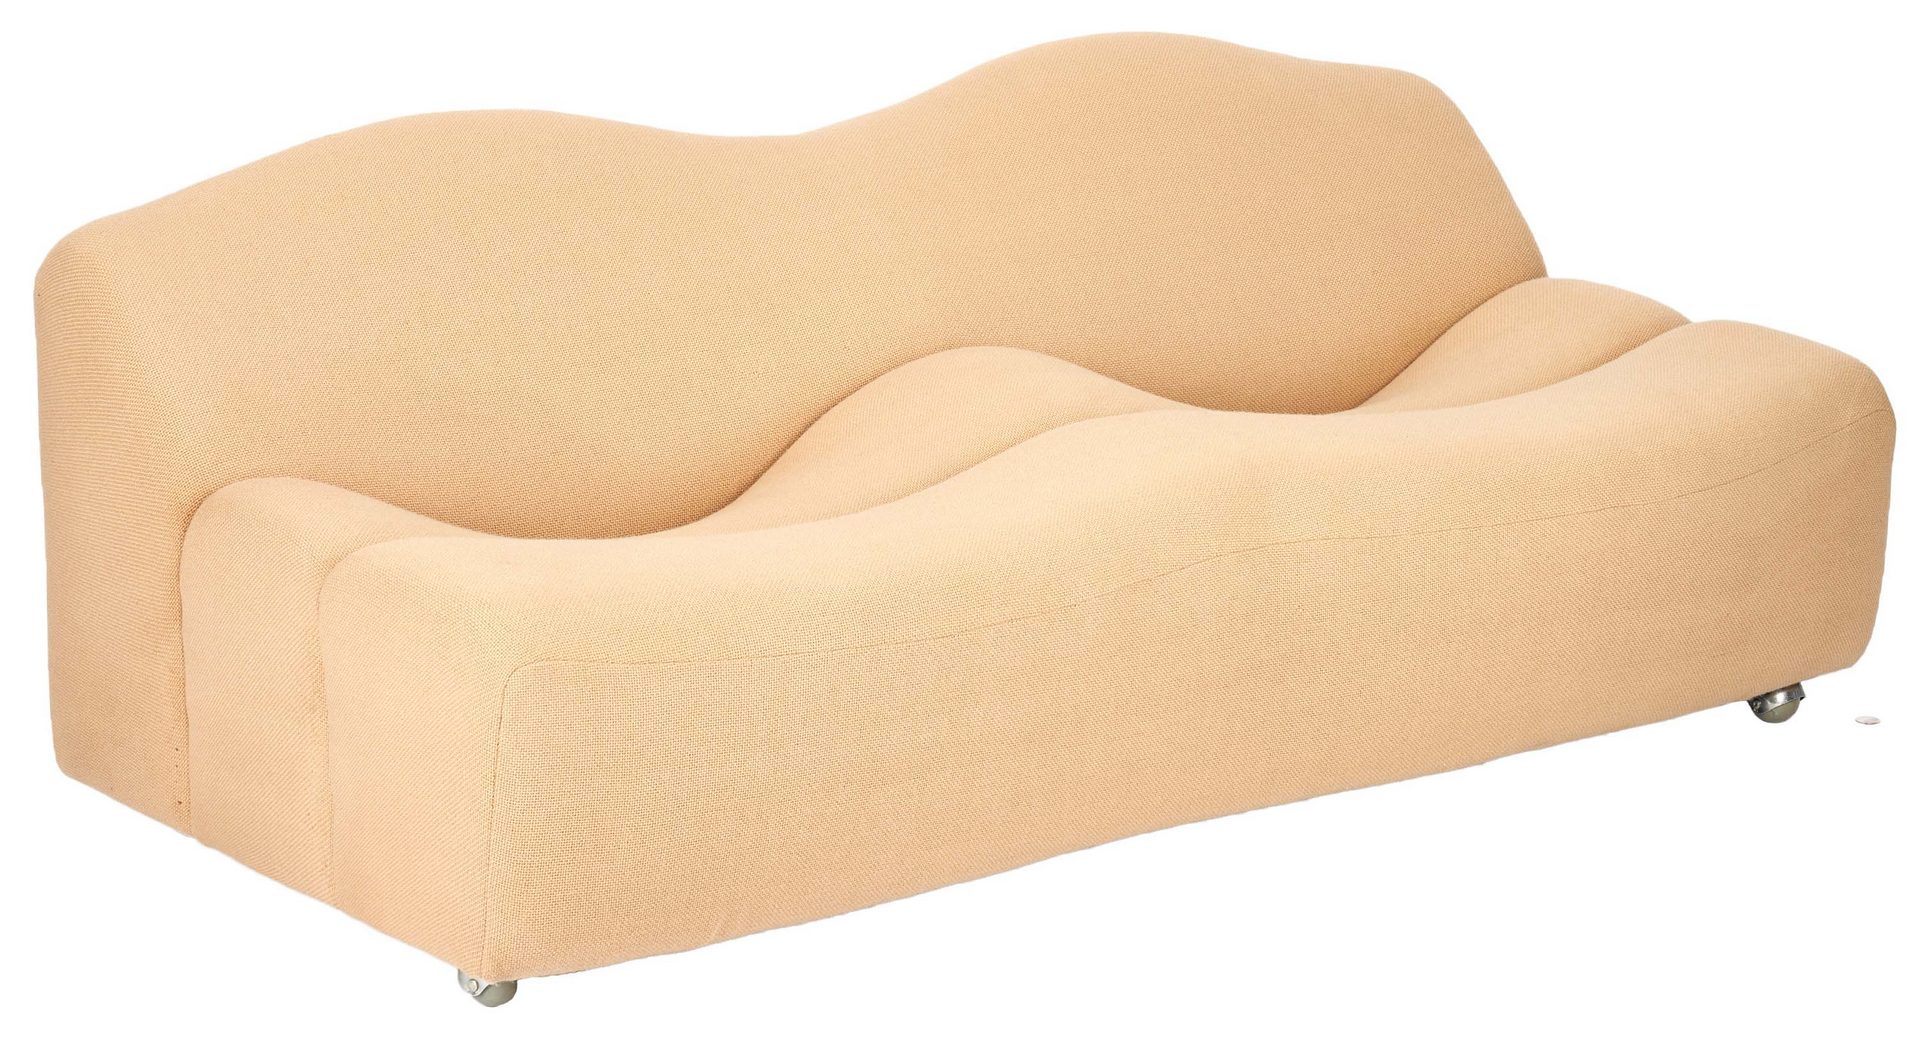 Lot 554: Pierre Paulin 2-Seat ABCD Sofa for Artifort (1 of 2 )